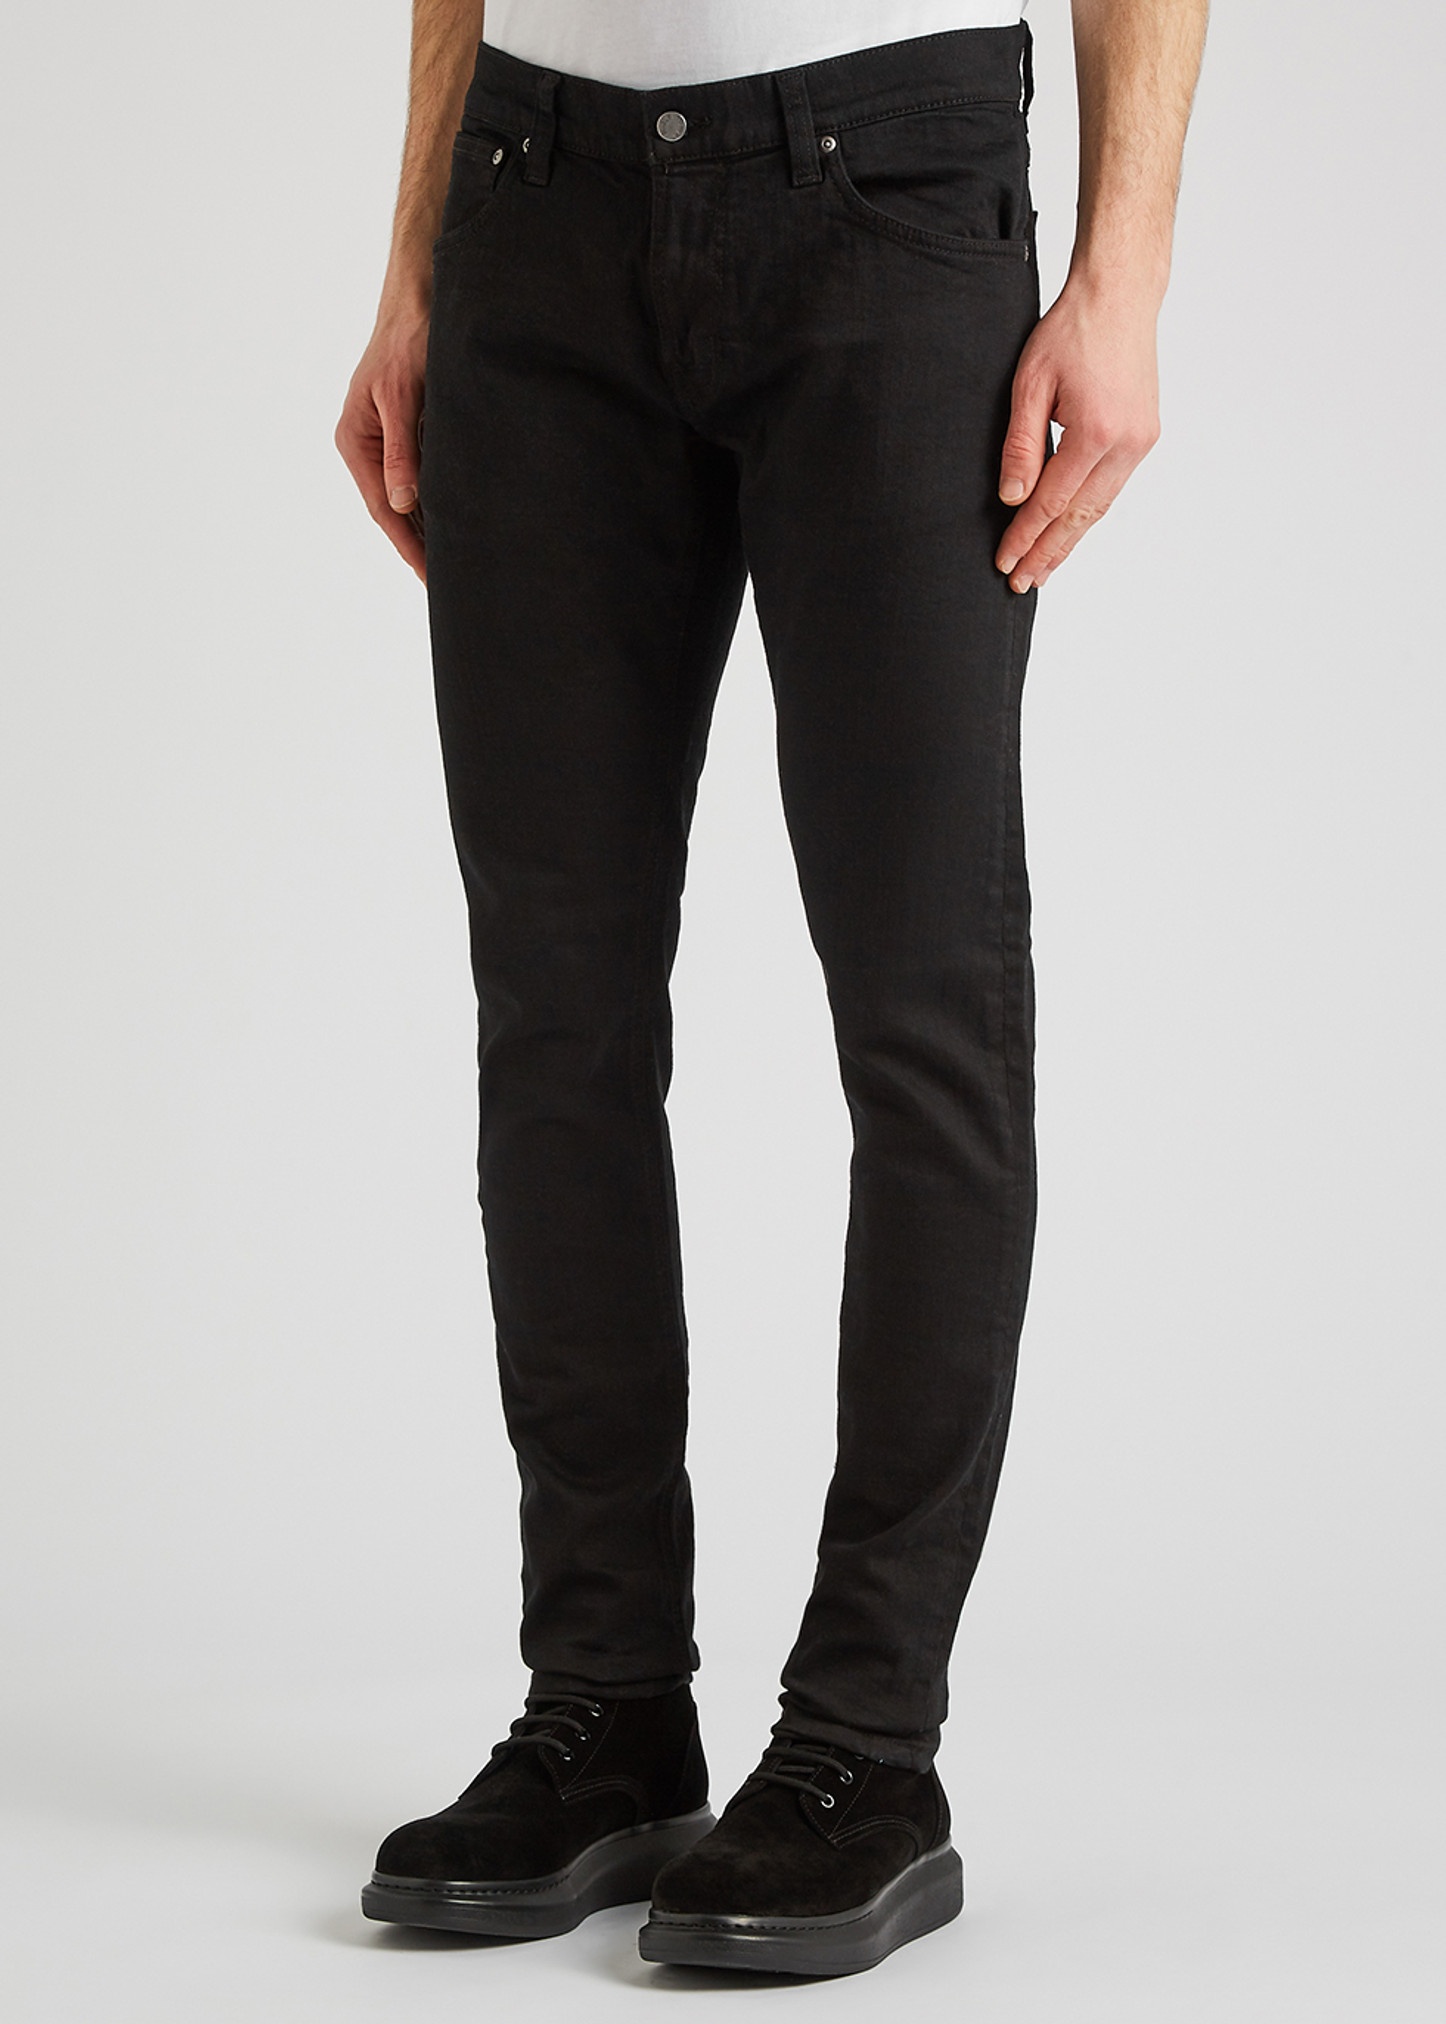 Tight Terry black skinny jeans - 2